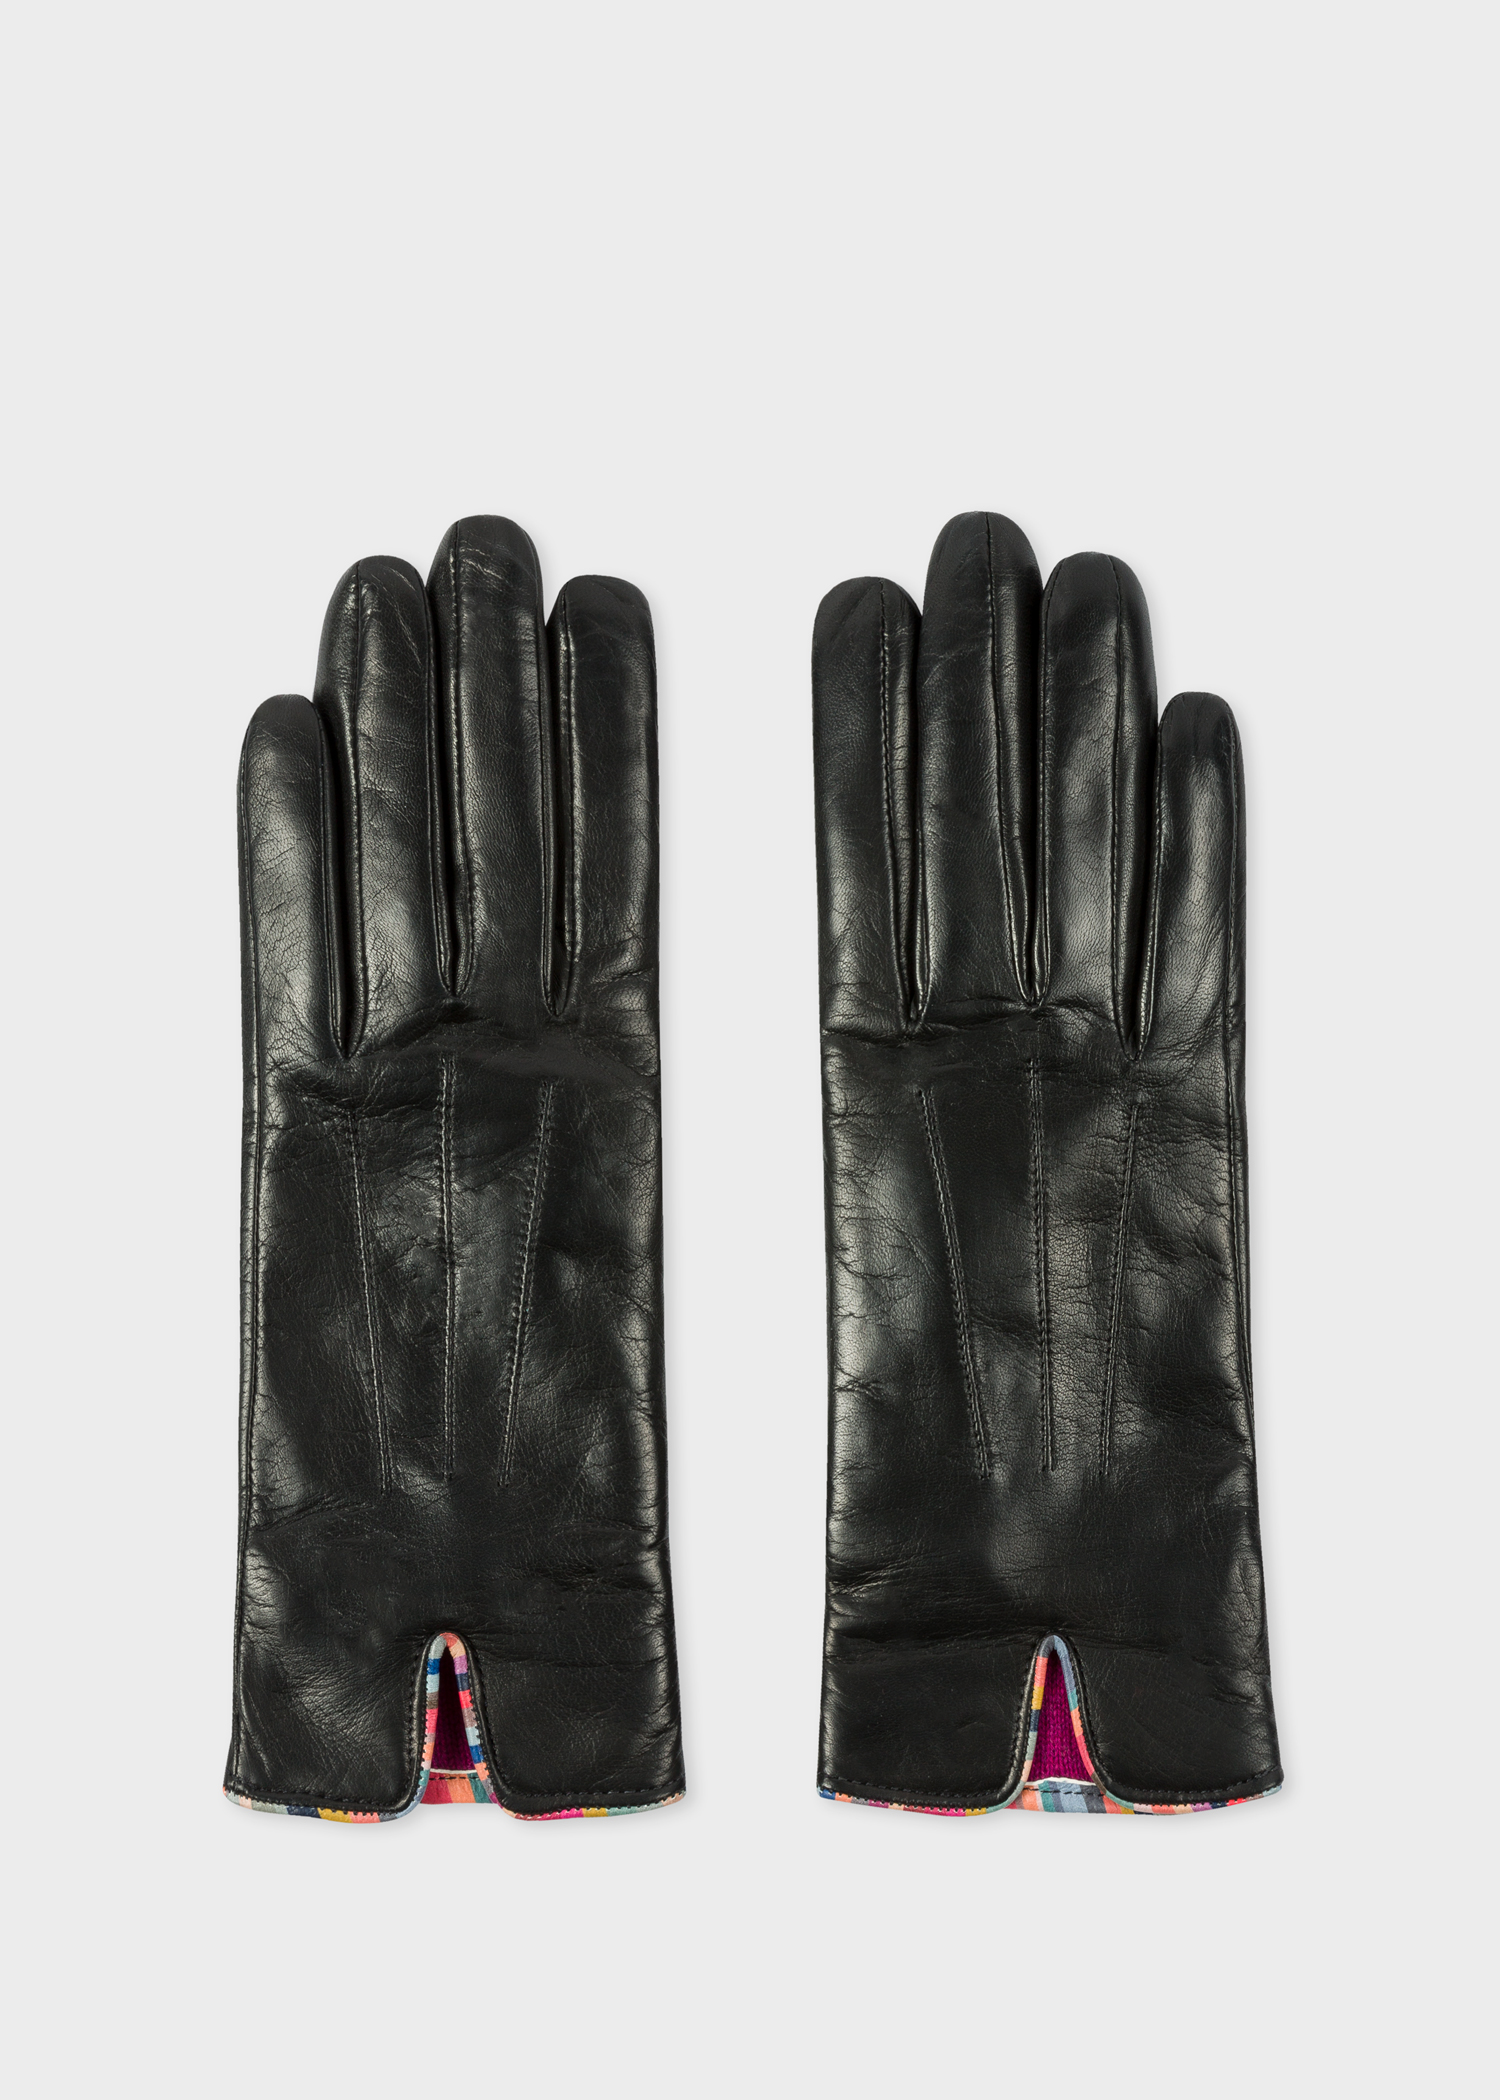 Women's Black Leather Gloves With 'Swirl' Piping by Paul Smith